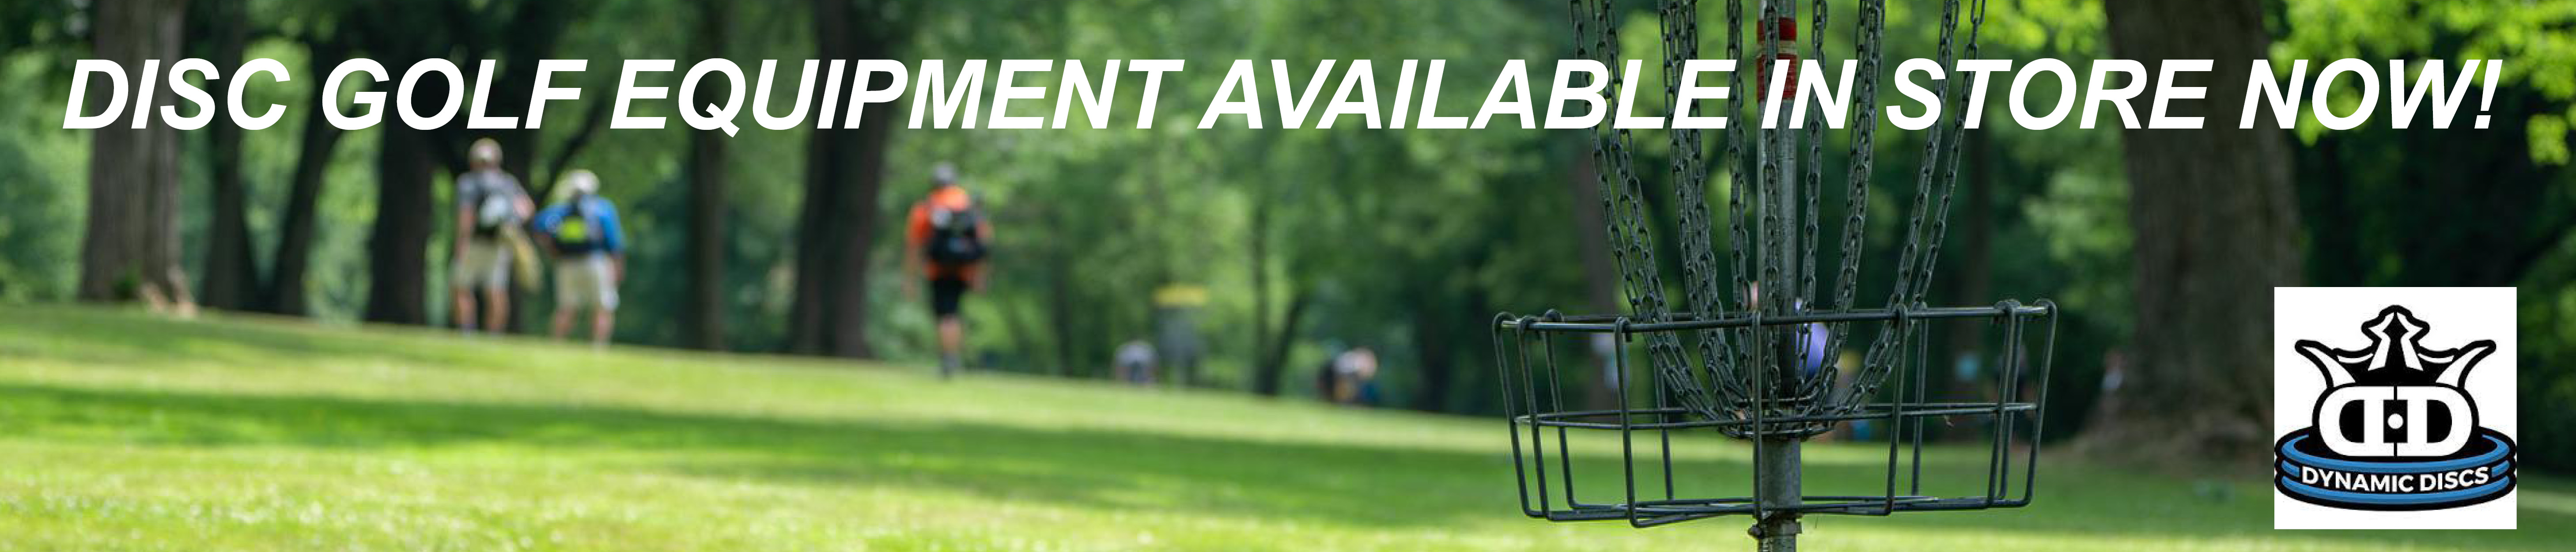 Disc golf equipment available in store